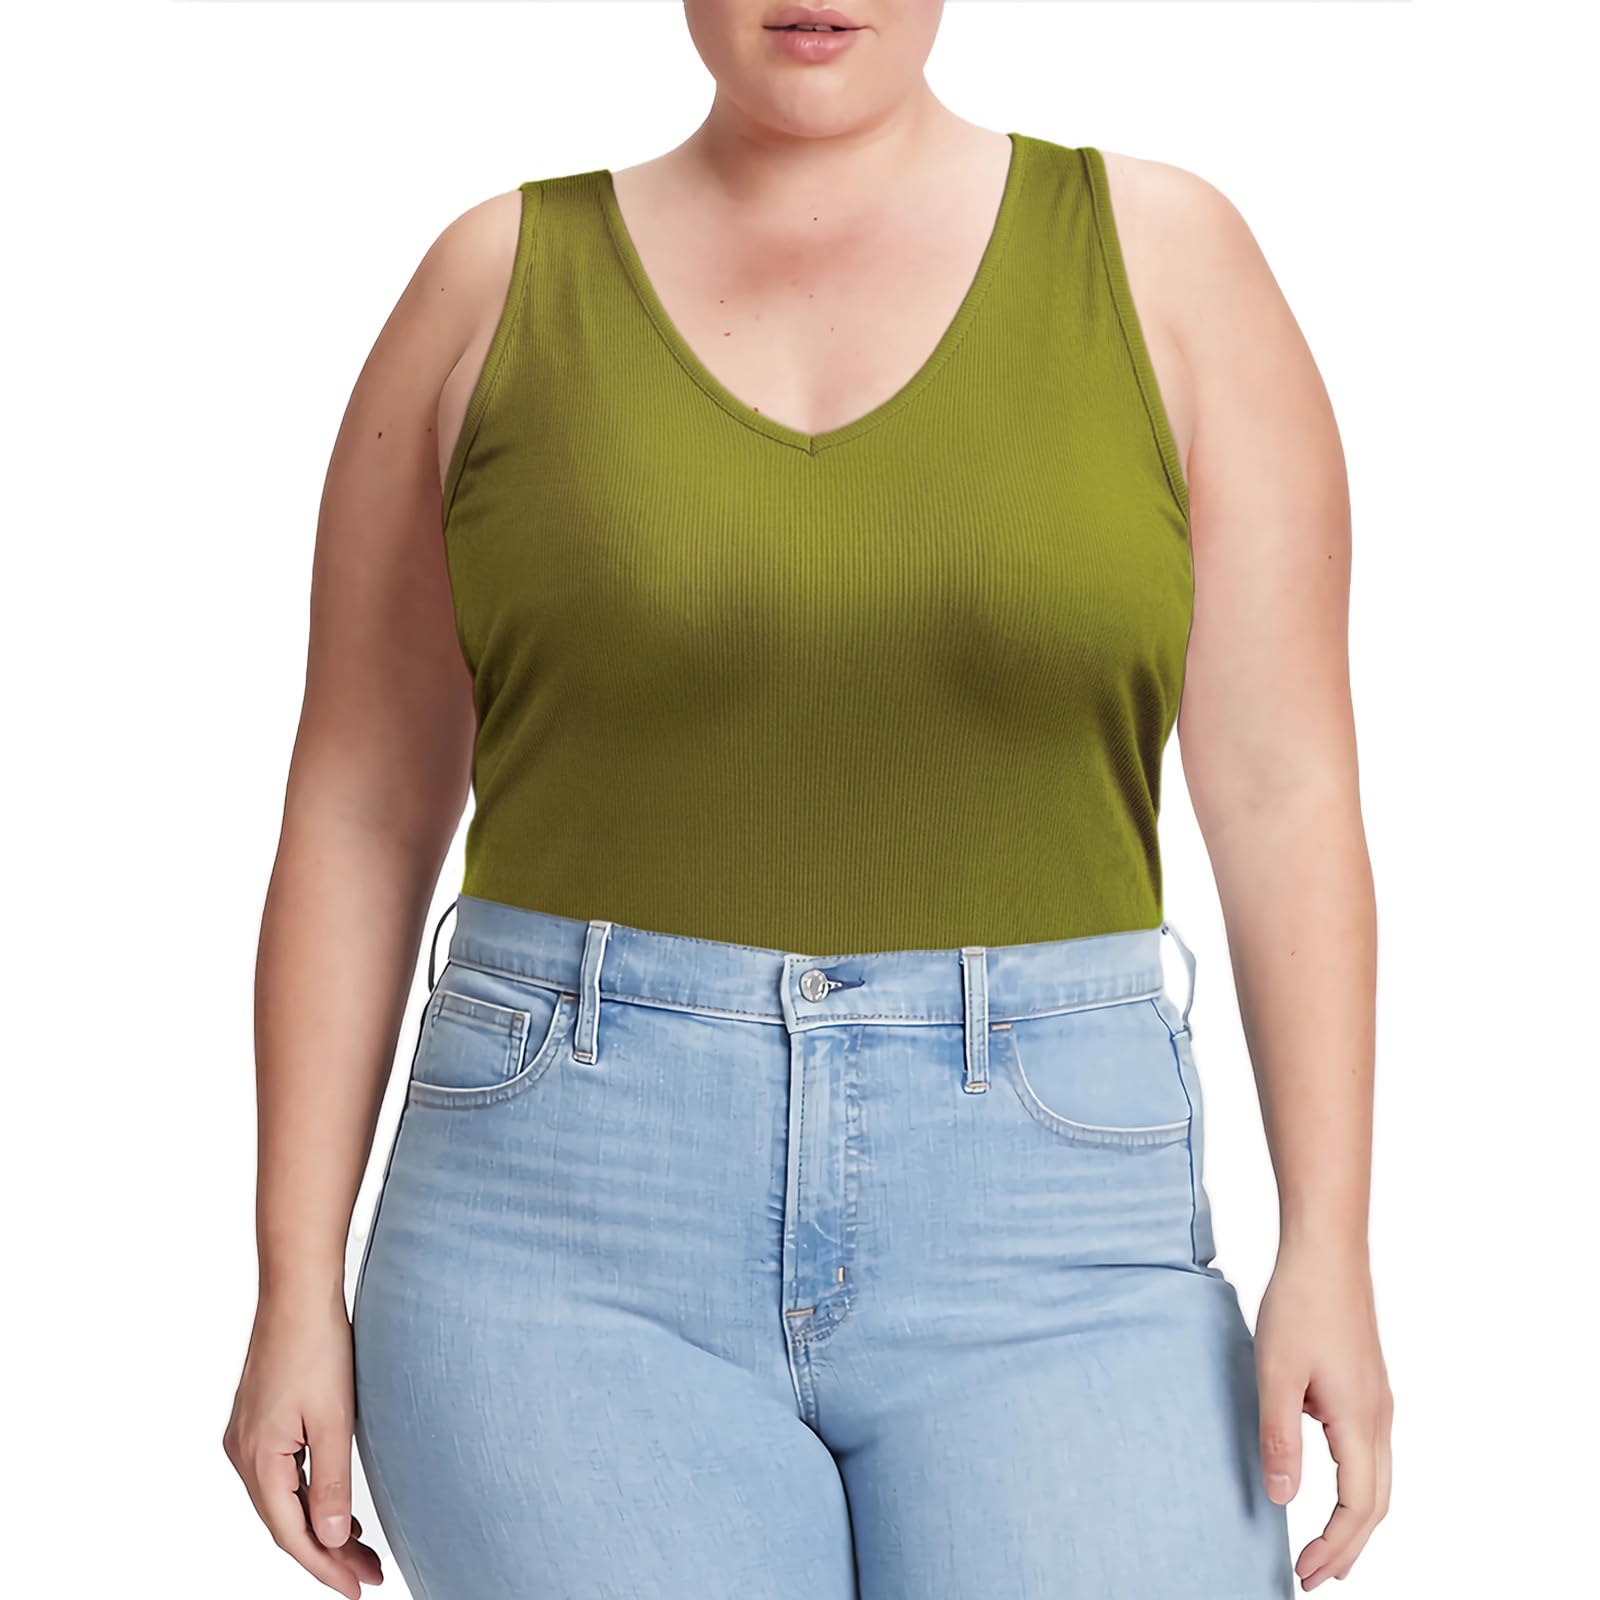 Plus Size Tank Tops for Women V Neck Knit Top-Olive Green - Moon Wood